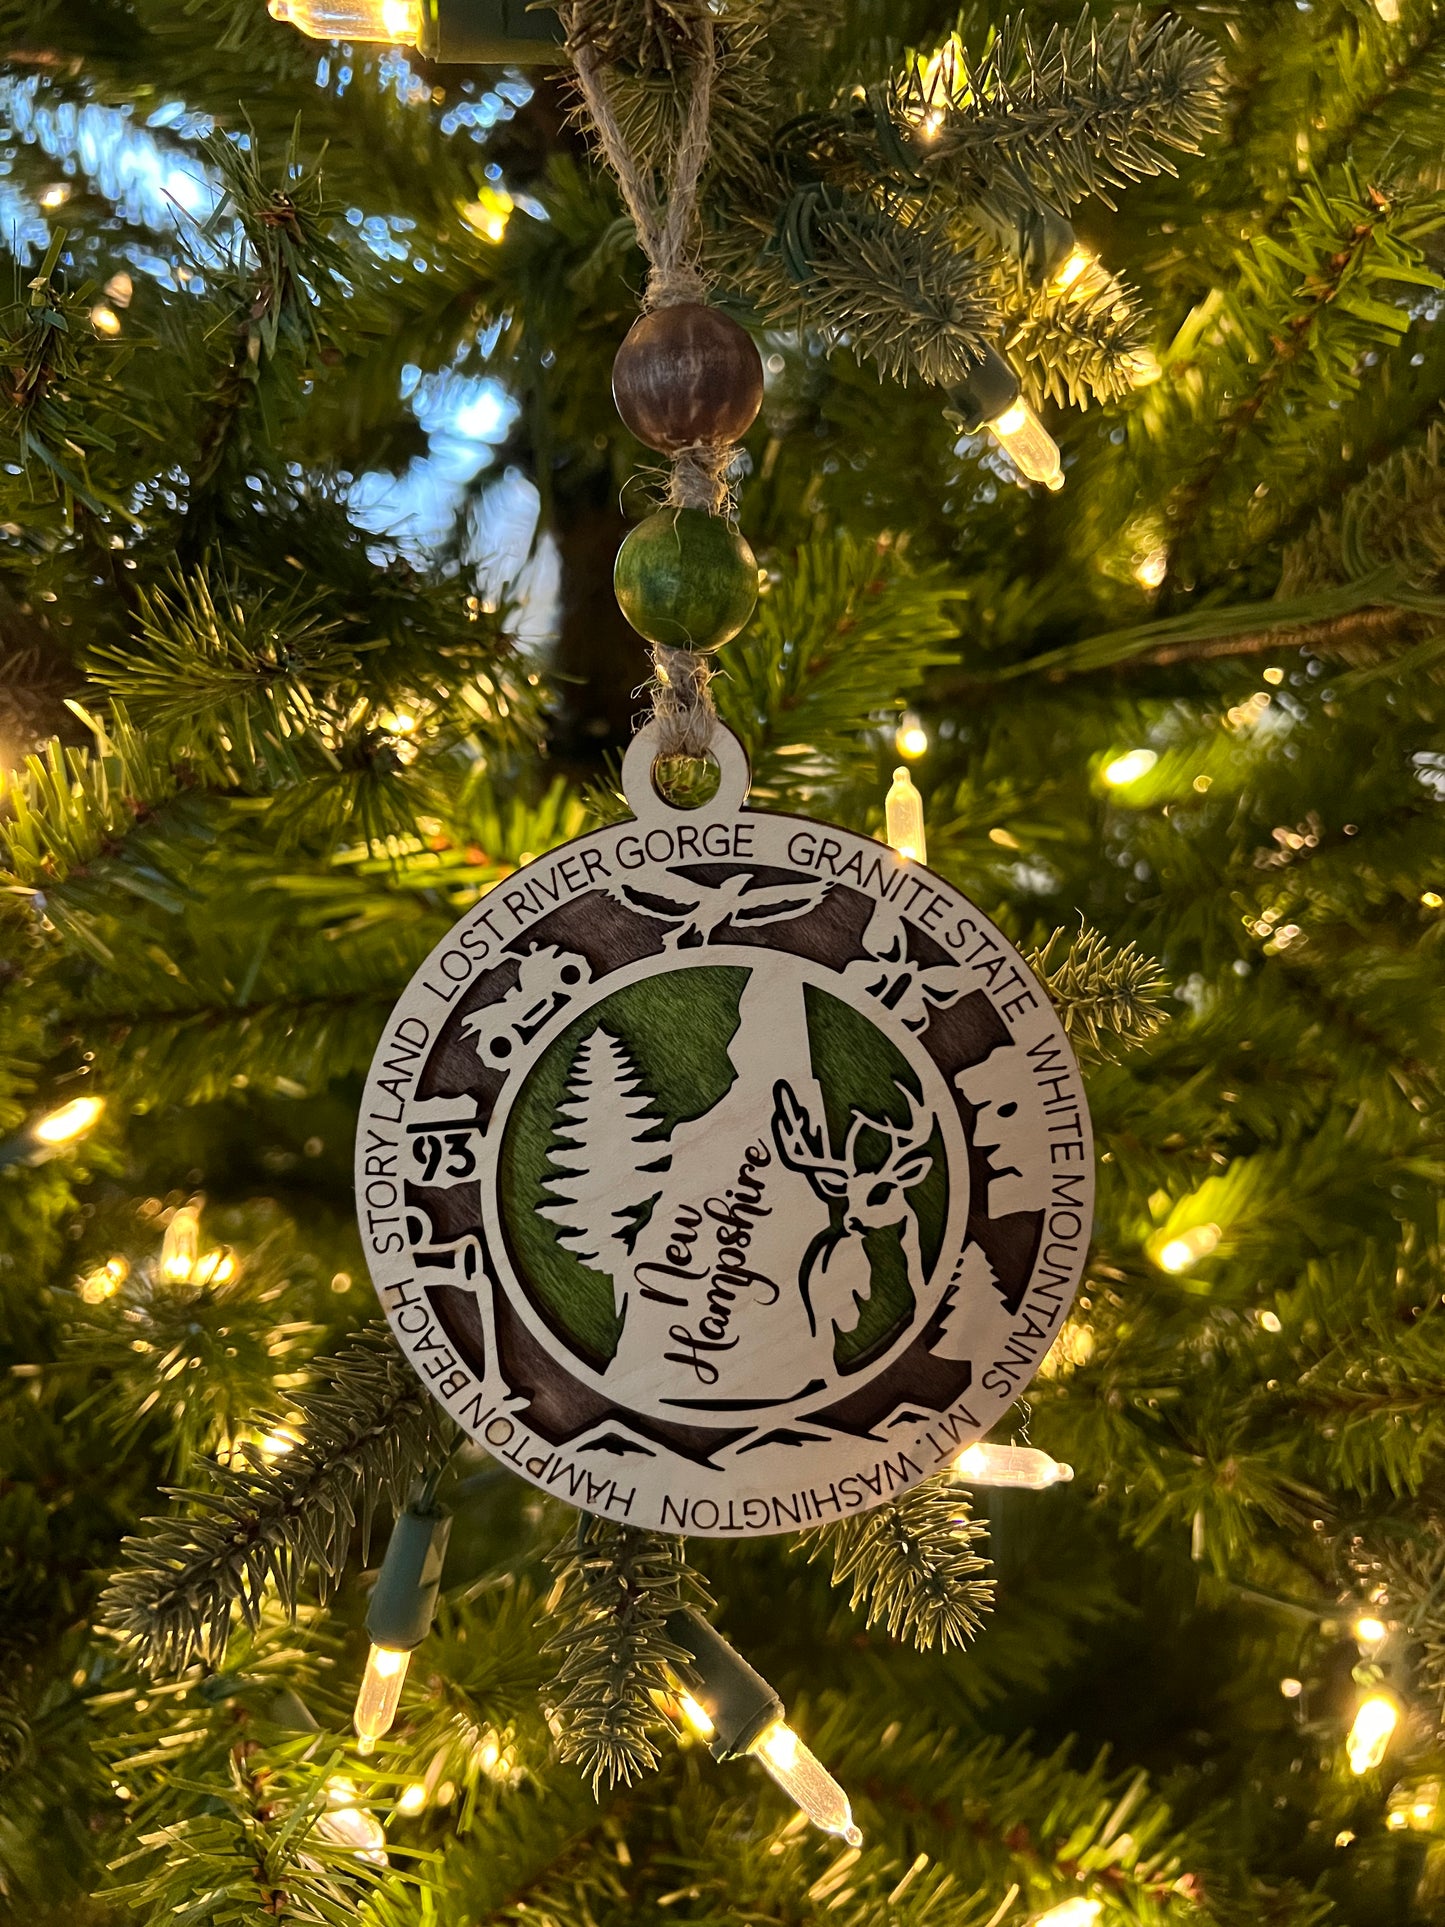 Display State Christmas Ornament - New Hampshire